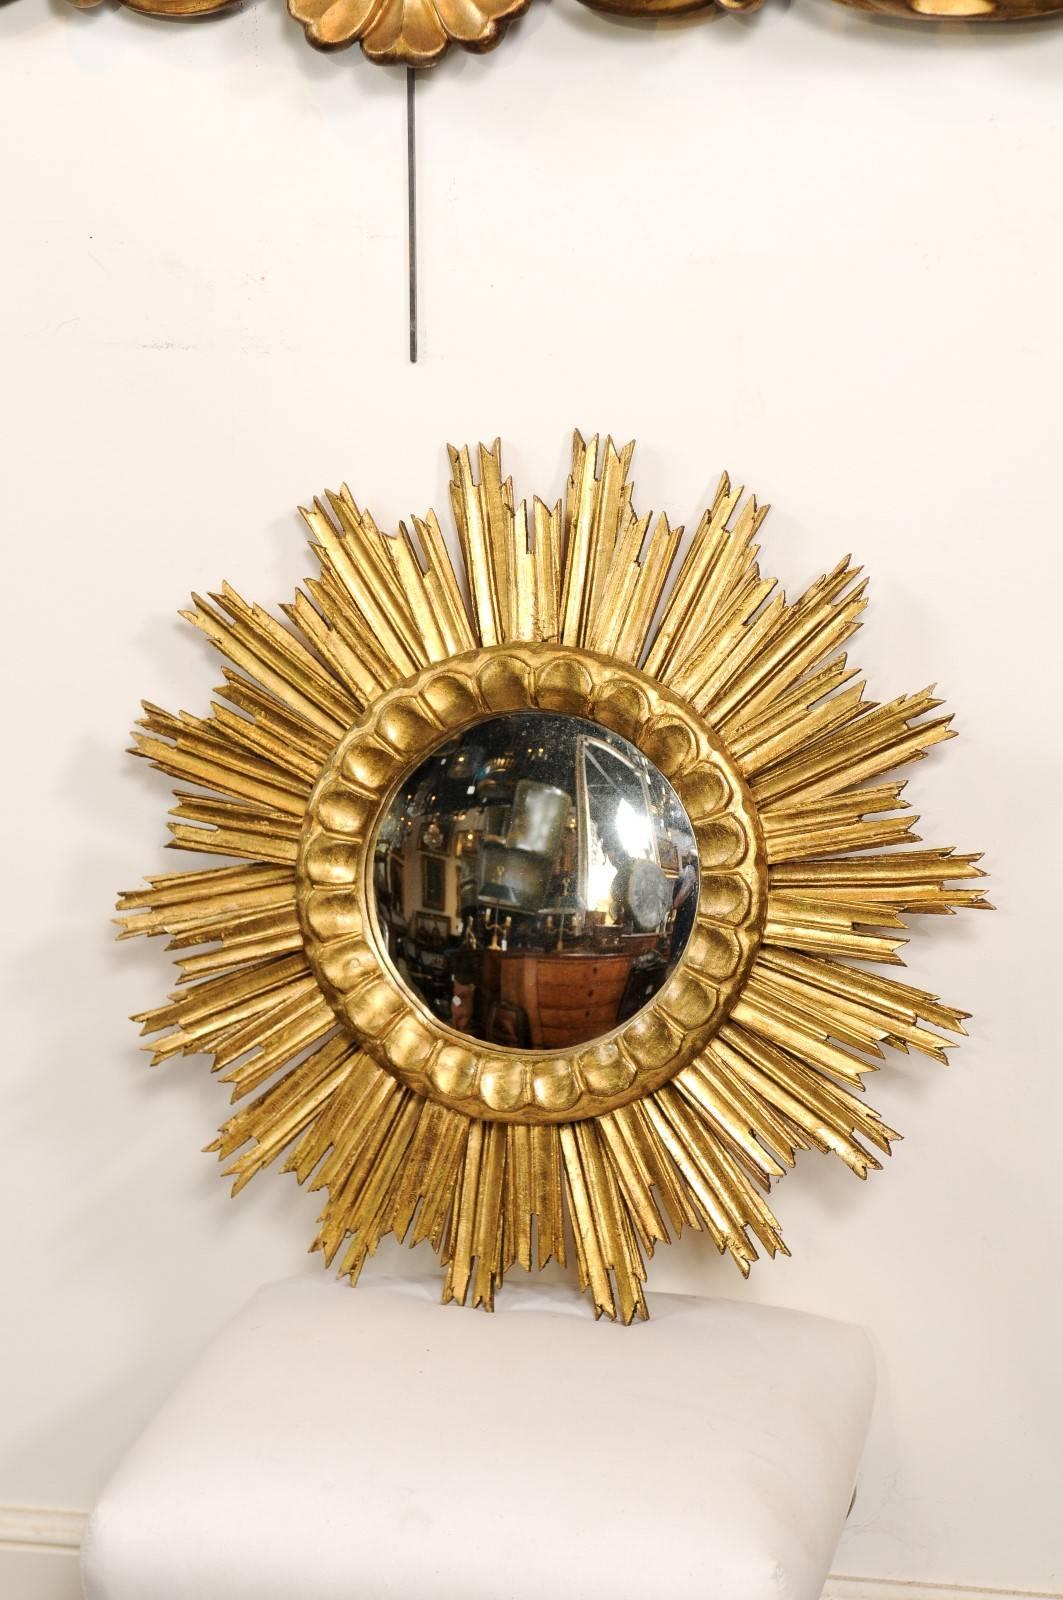 A French sunburst mirror with convex glass in a giltwood frame. This Mid-Century mirror is set in a circular frame with a ring of exquisite petal motifs. Surrounding the ring is a bevy of veined sun rays of alternating heights. This lovely sunburst